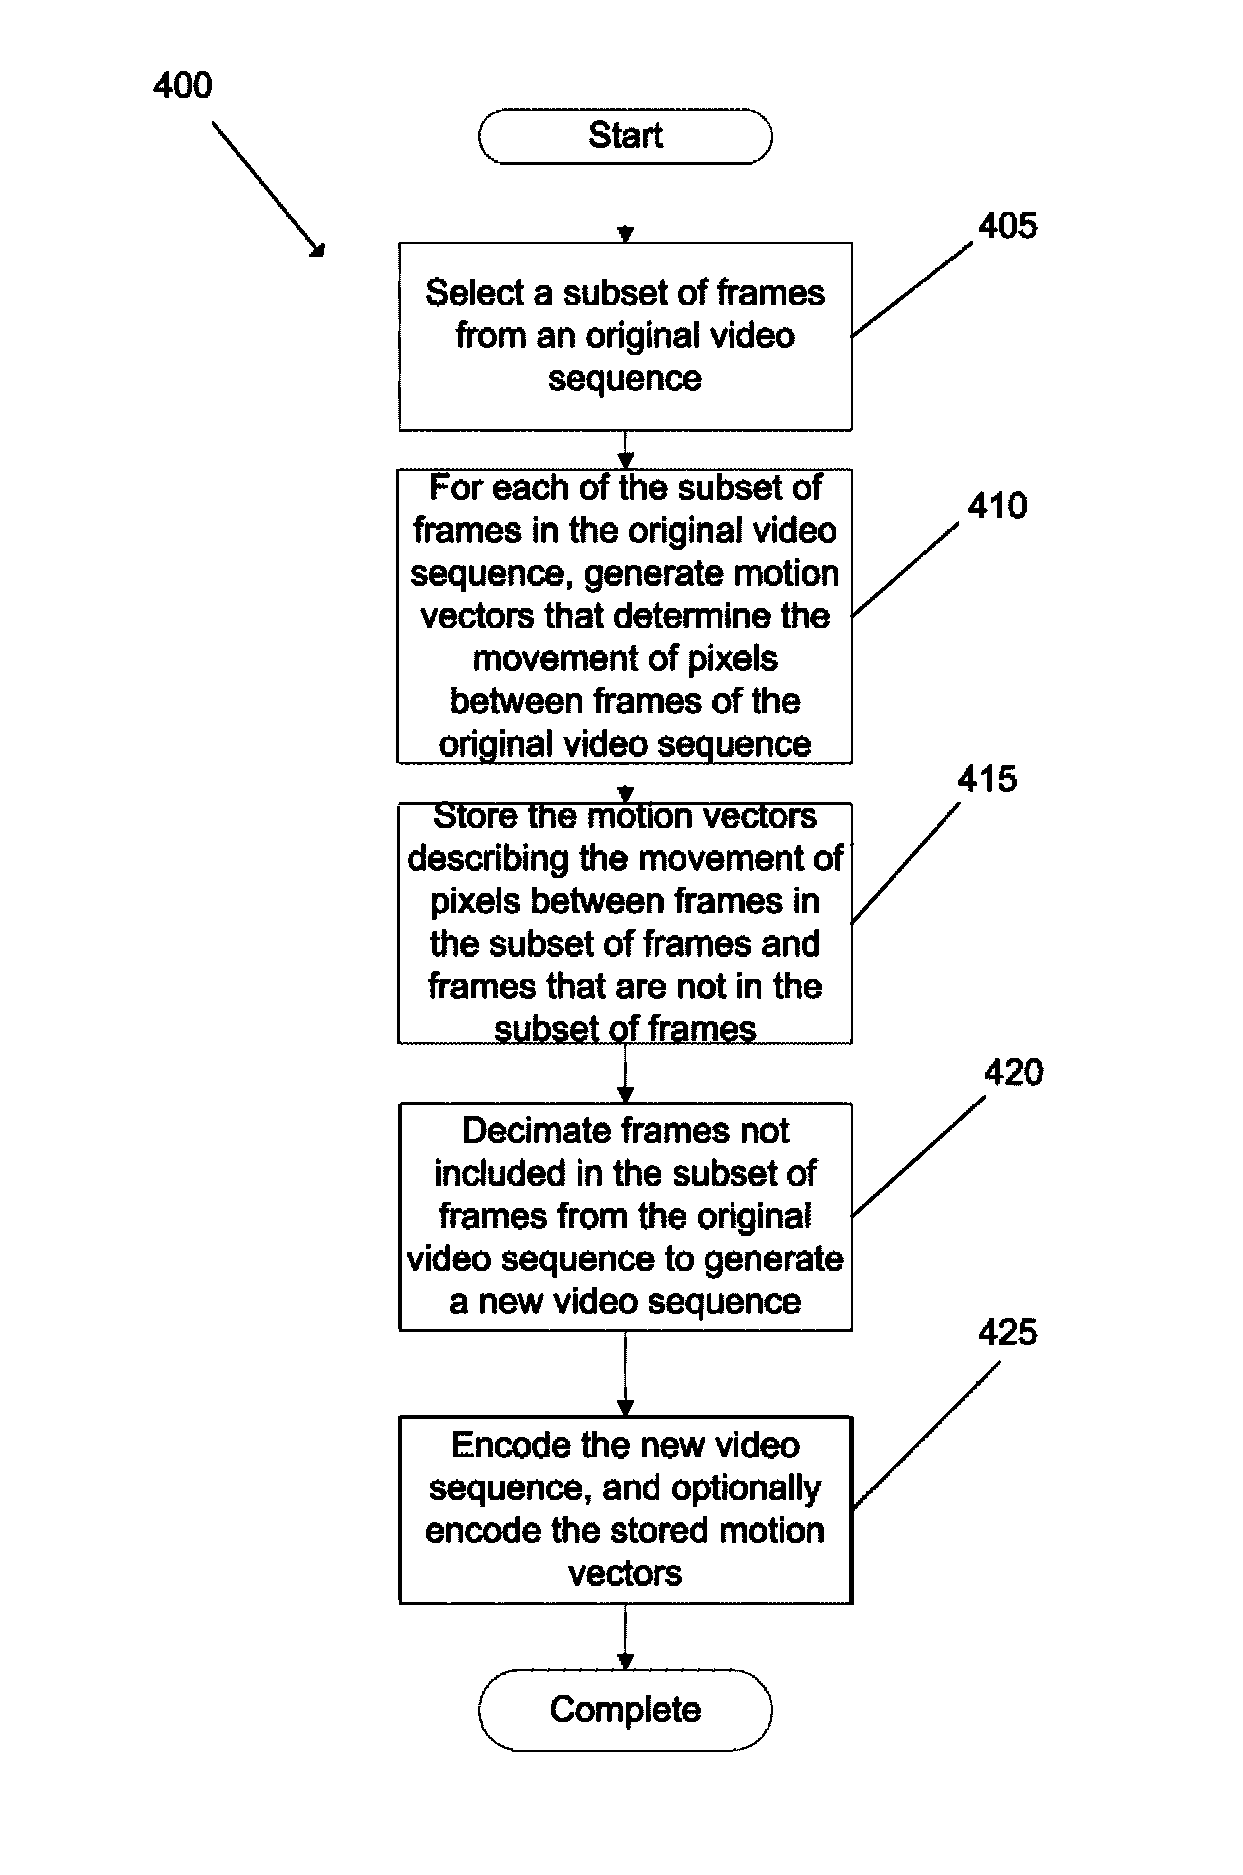 Systems and methods for motion-vector-aided video interpolation using real-time smooth video playback speed variation